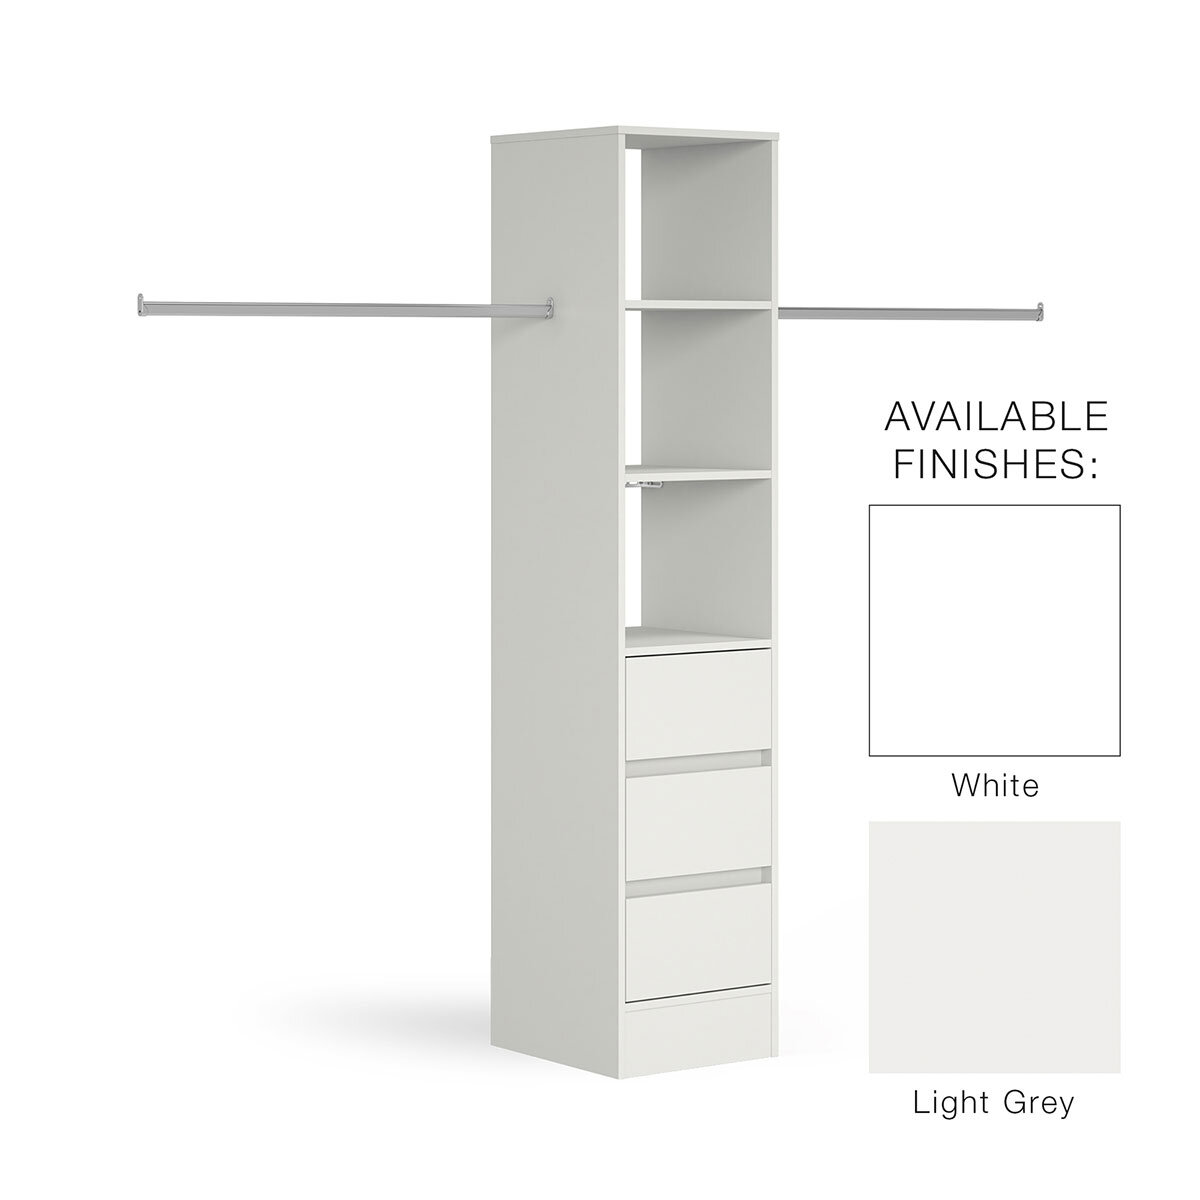 Spacepro Sliding 3 Door Wardrobe with Installation (Up to 3m Opening Space)